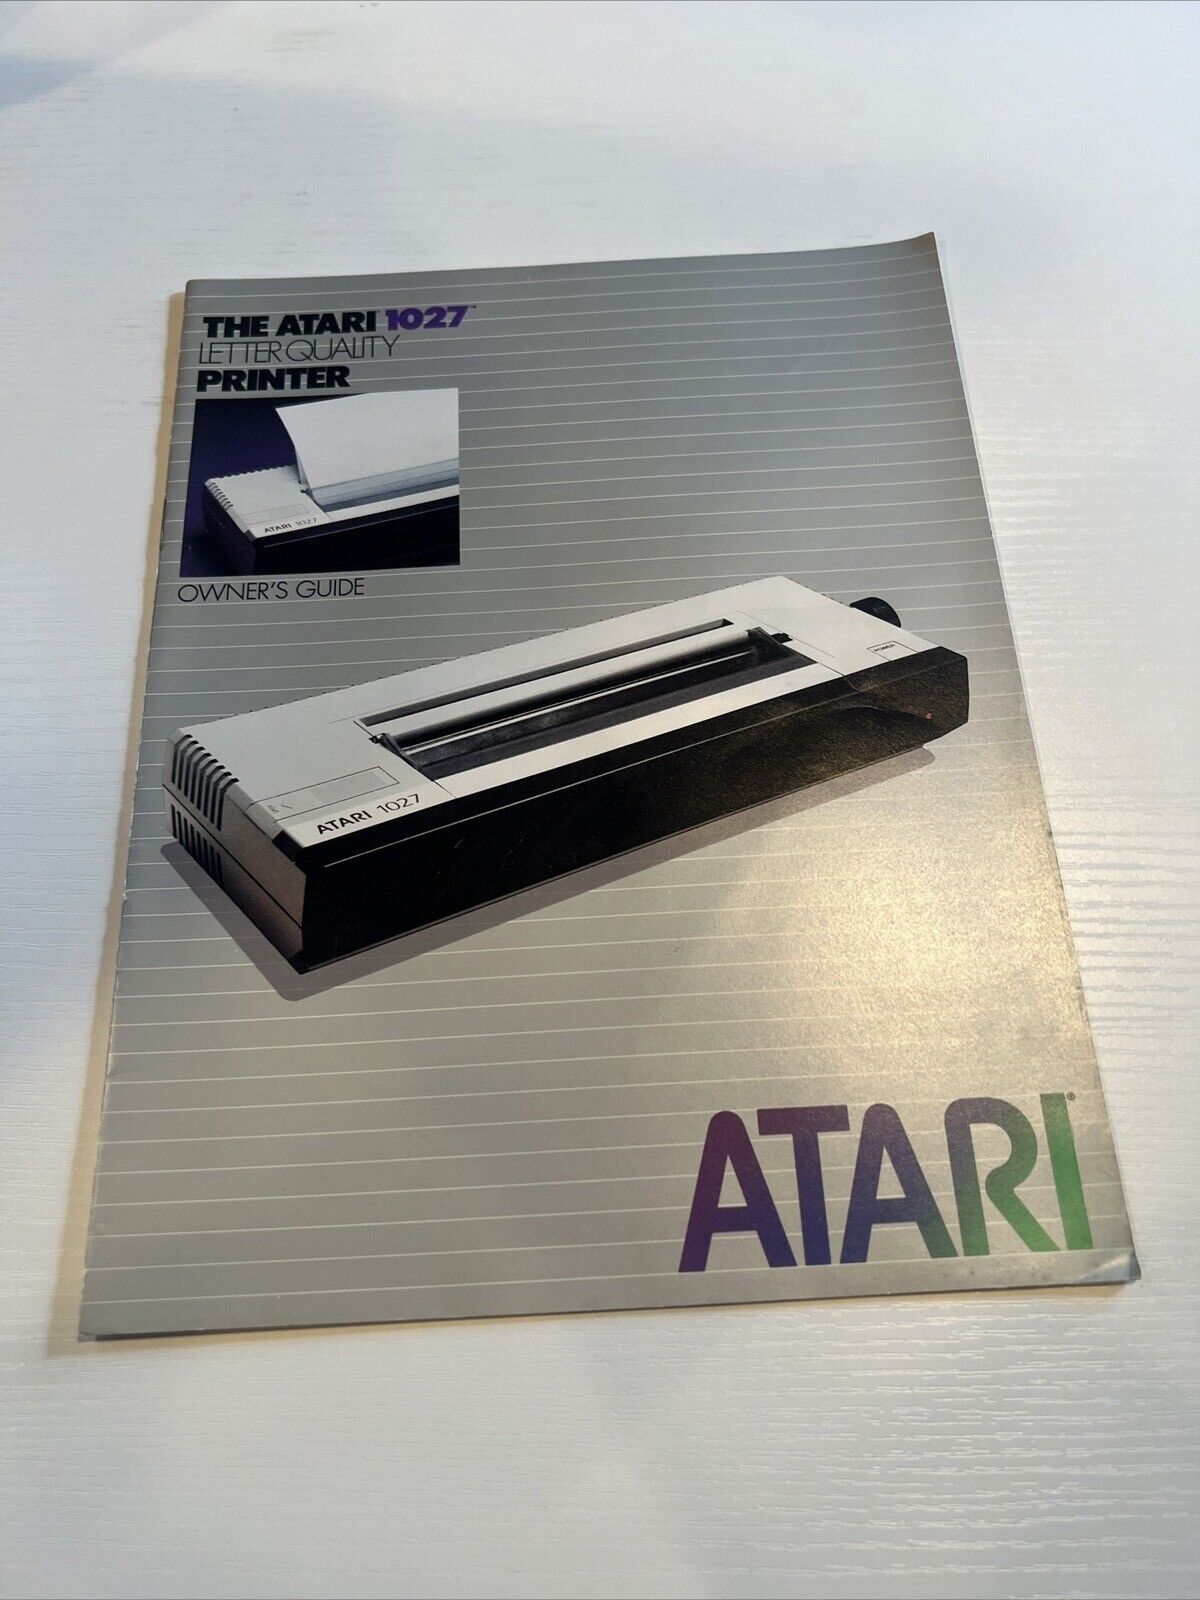 Atari 1027 Letter Quality Printer Owner\'s Manual/Guide - Complete